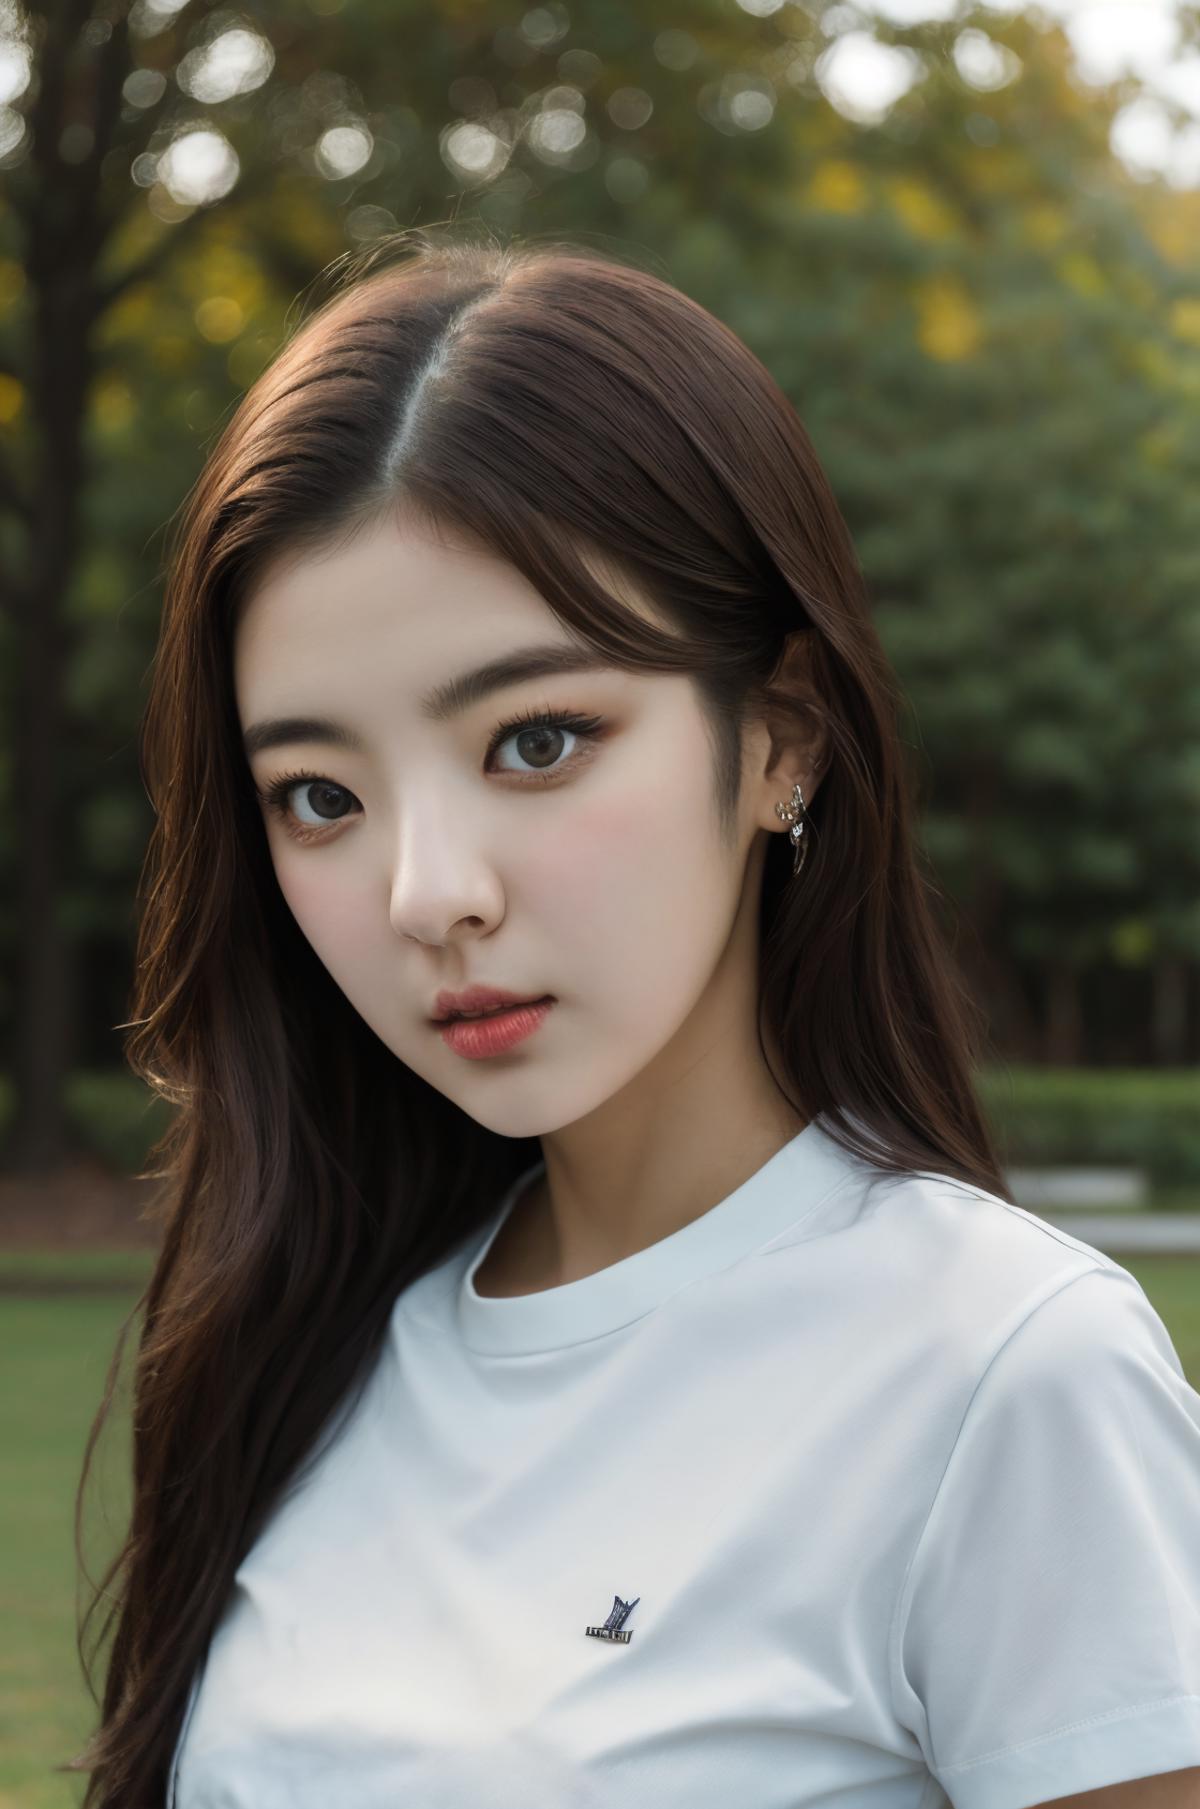 Lia - Itzy image by jhypktw203